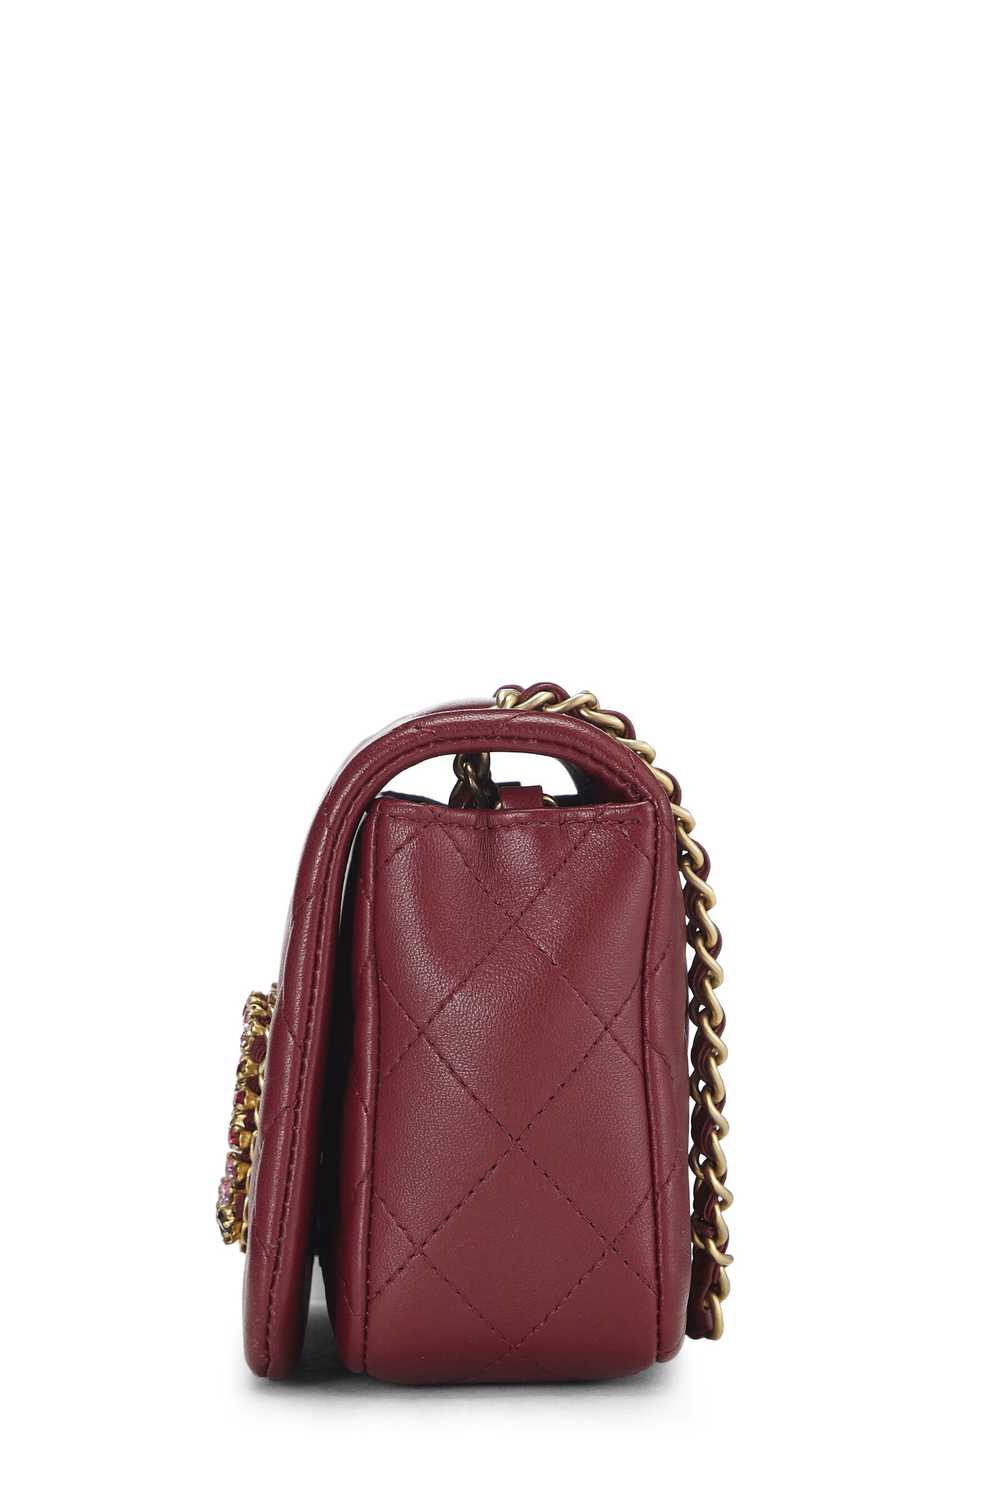 Burgundy Quilted Lambskin Crystal Flap Bag Mini - image 3